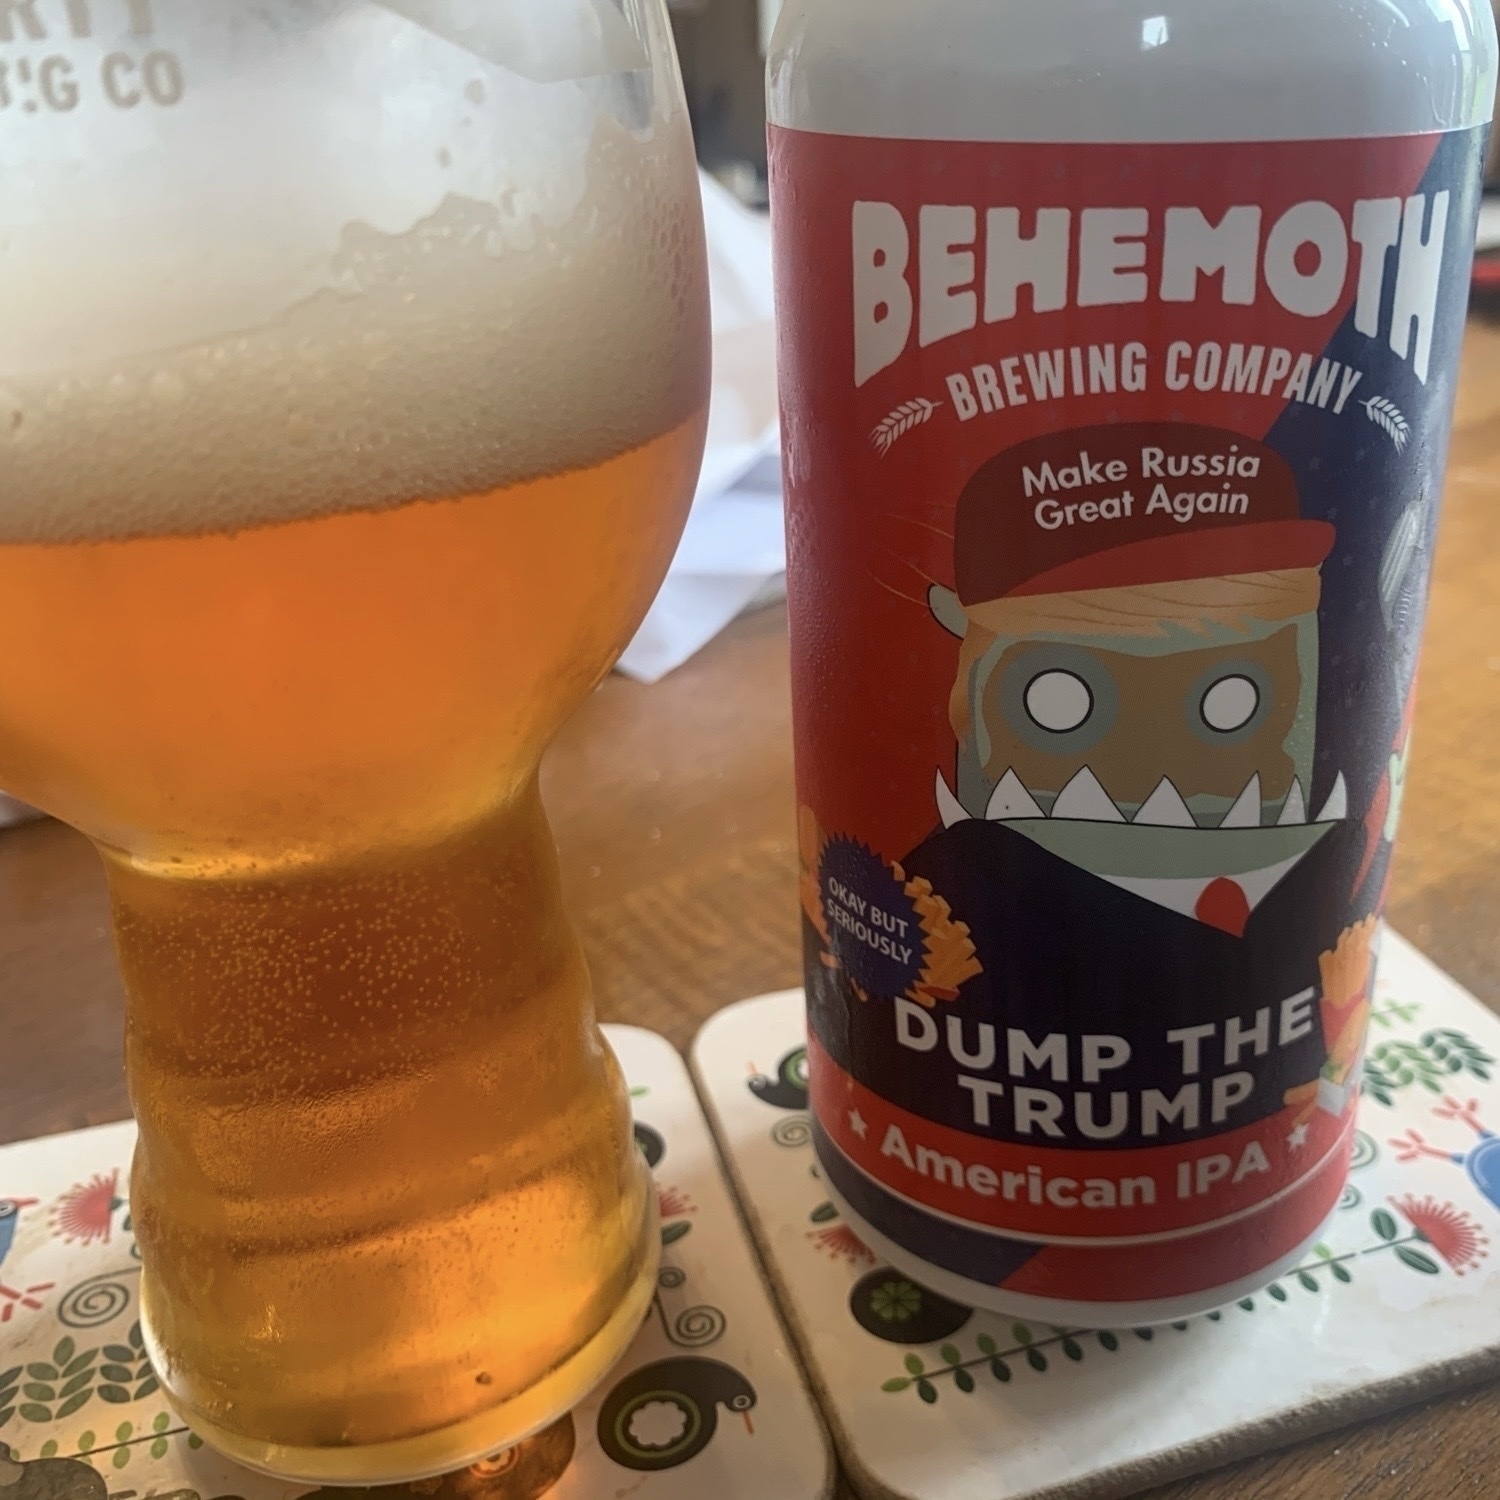 A glass and a can of Dump the Trump American IPA by Behemoth Brewing